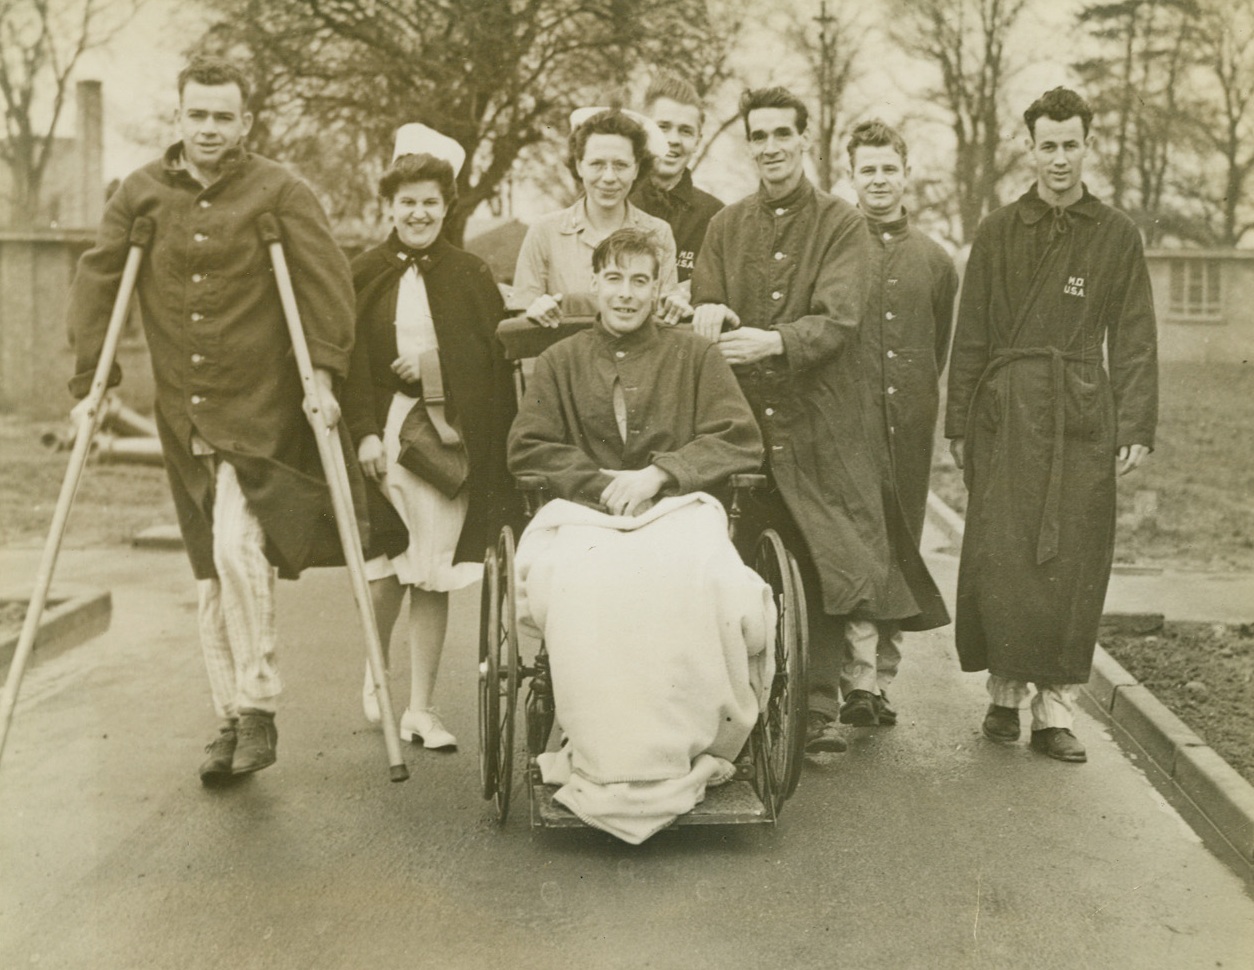 Doin’ Fine, 2/17/1943. Somewhere in Britain - Convalescing in a West Country Hospital, British and American soldiers, accompanied by American nurses, take a stroll on the hospital grounds. All well on the way to recovery, the men were brought to Britain after being wounded on North African battlefields. Passed by Censors Credit: ACME;